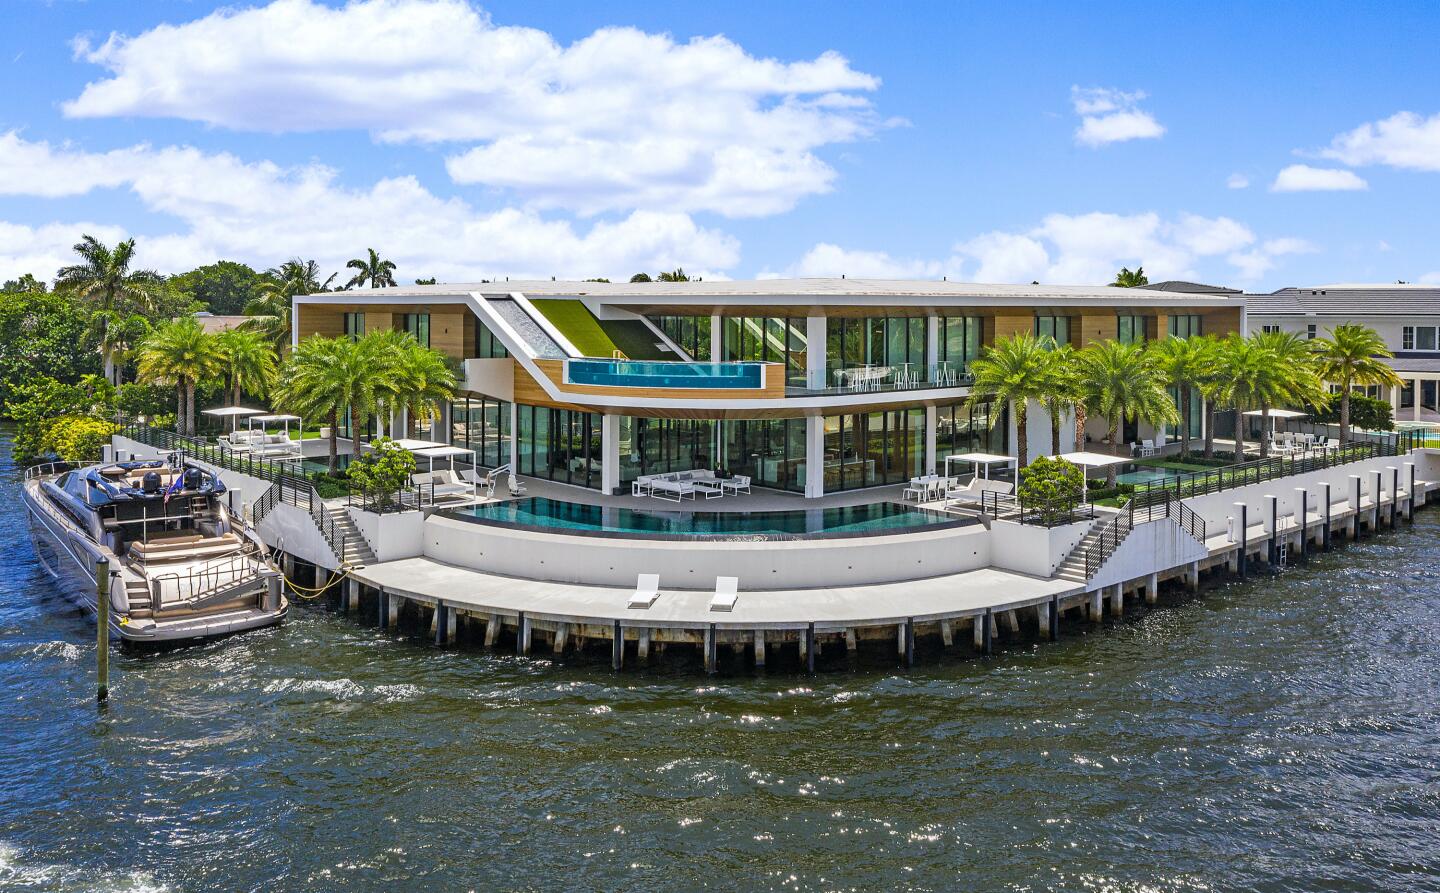 The waterfront home.